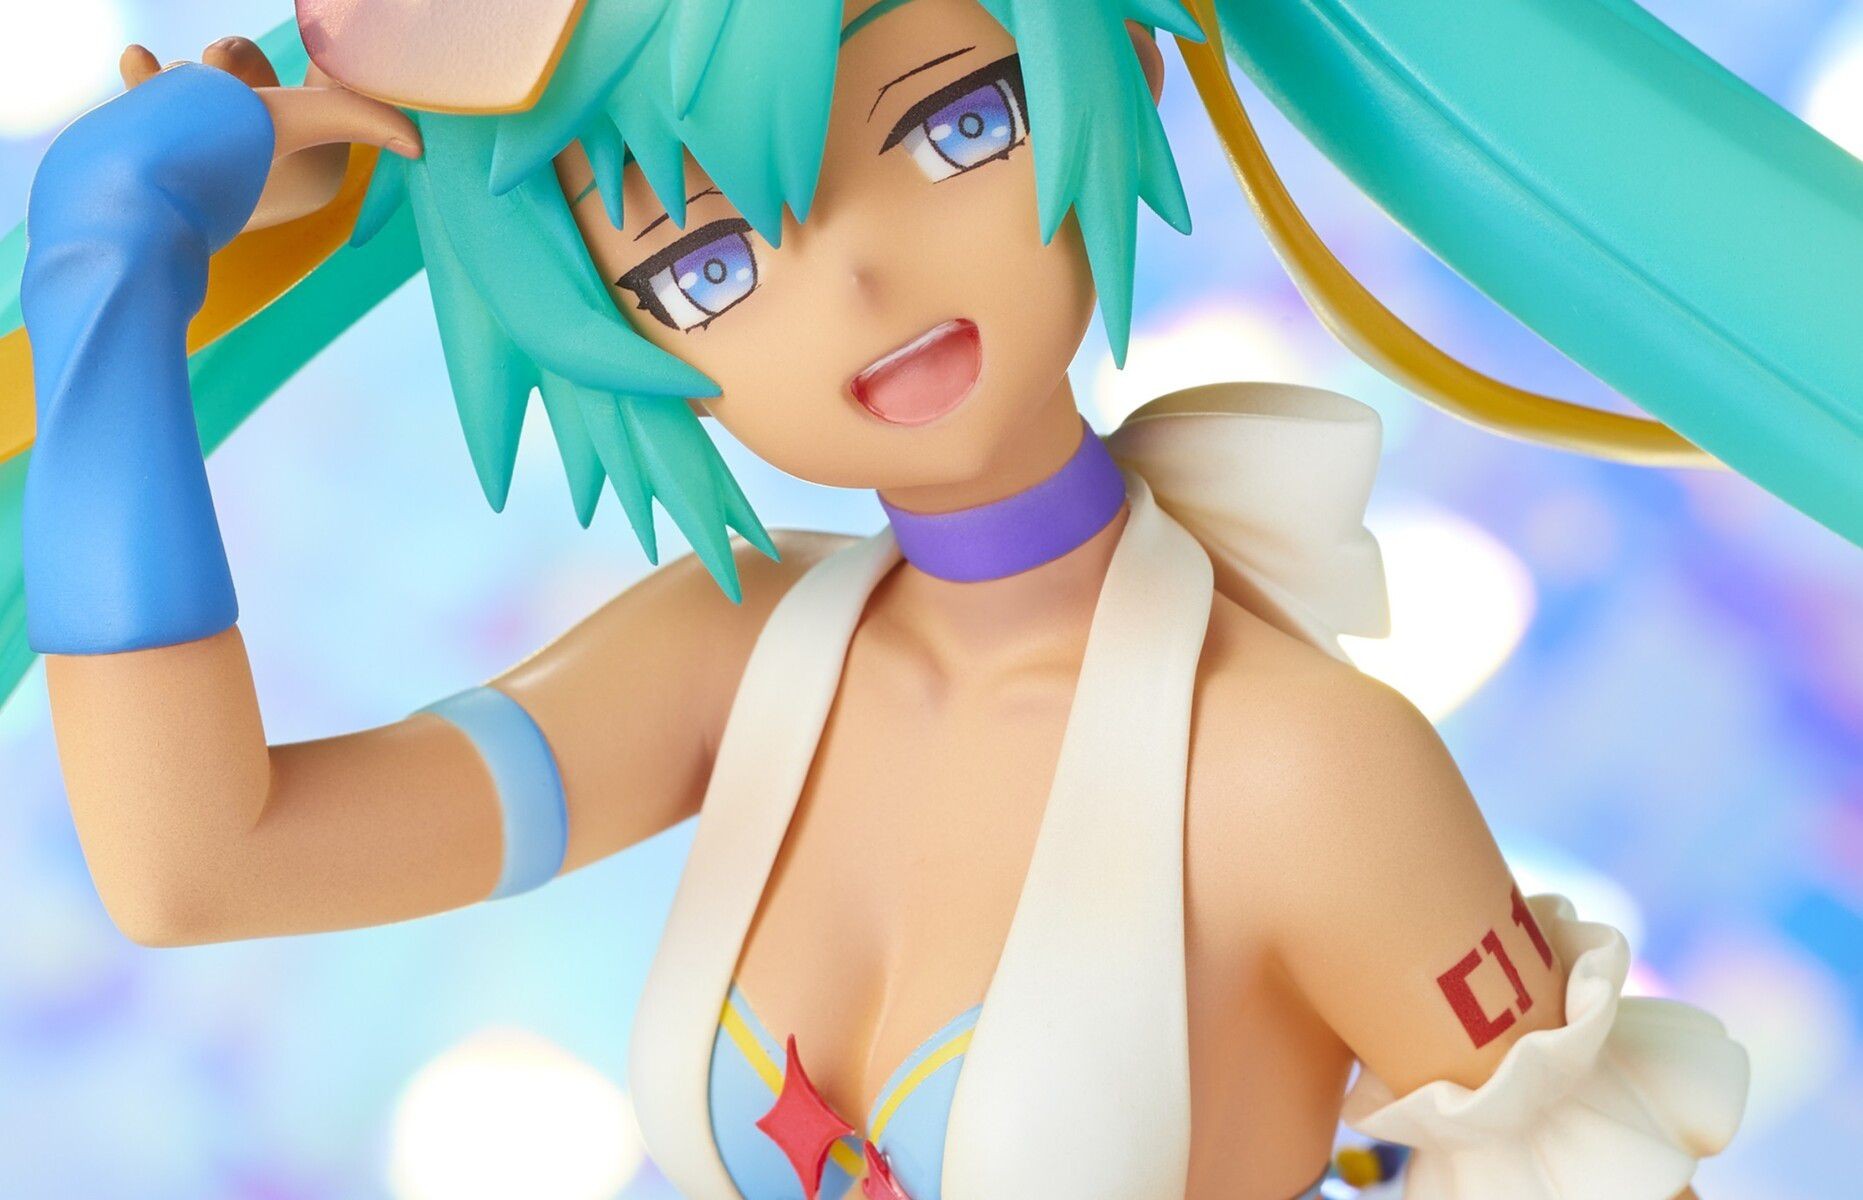 Slut Porn [Hatsune Miku] Erotic Tanned And Erotic Figure Of A Very Nice Swimsuit Costume In Jito Eyes! Weird